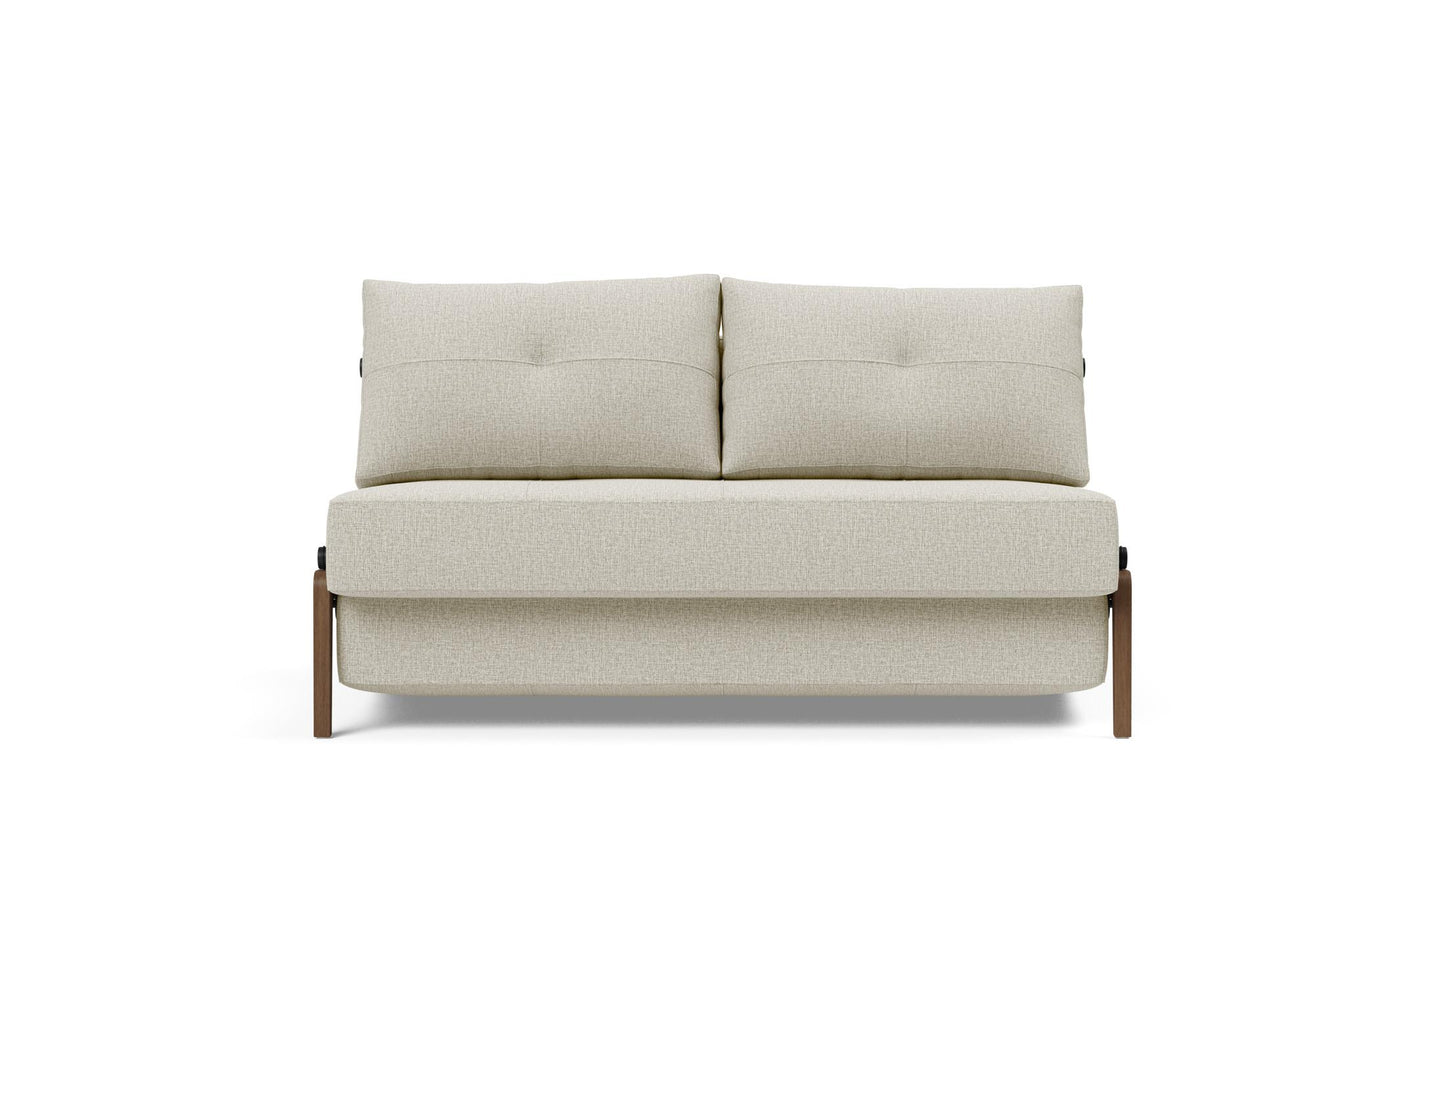 Cubed Sofa - Full size, with Dark Wood Legs